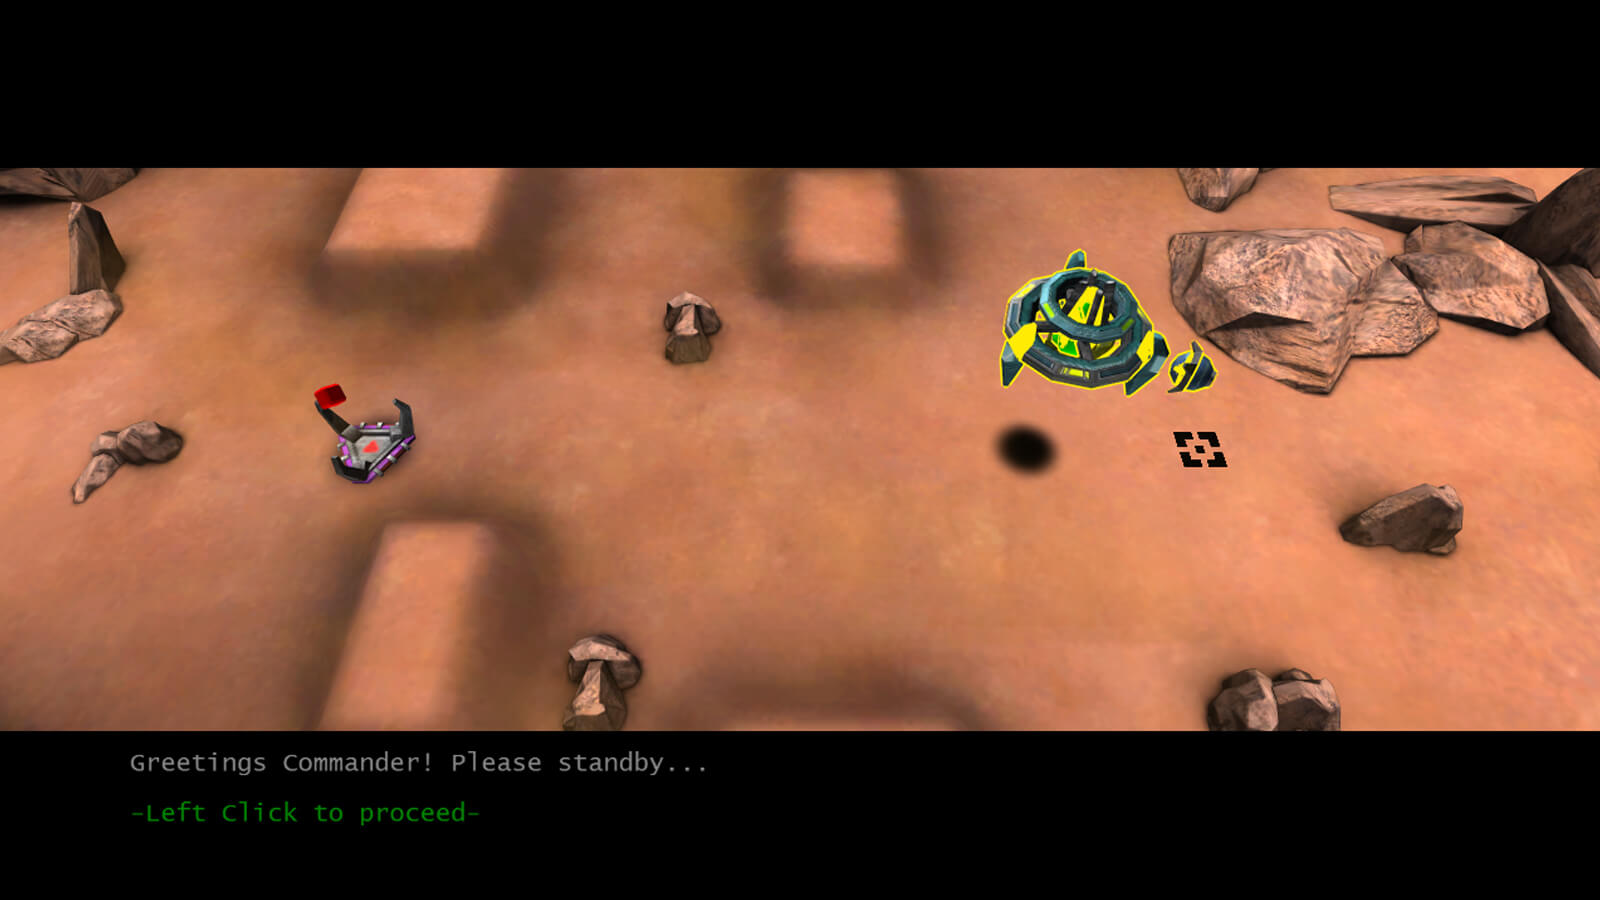 The player's green and yellow ship hovers above rocky terrain